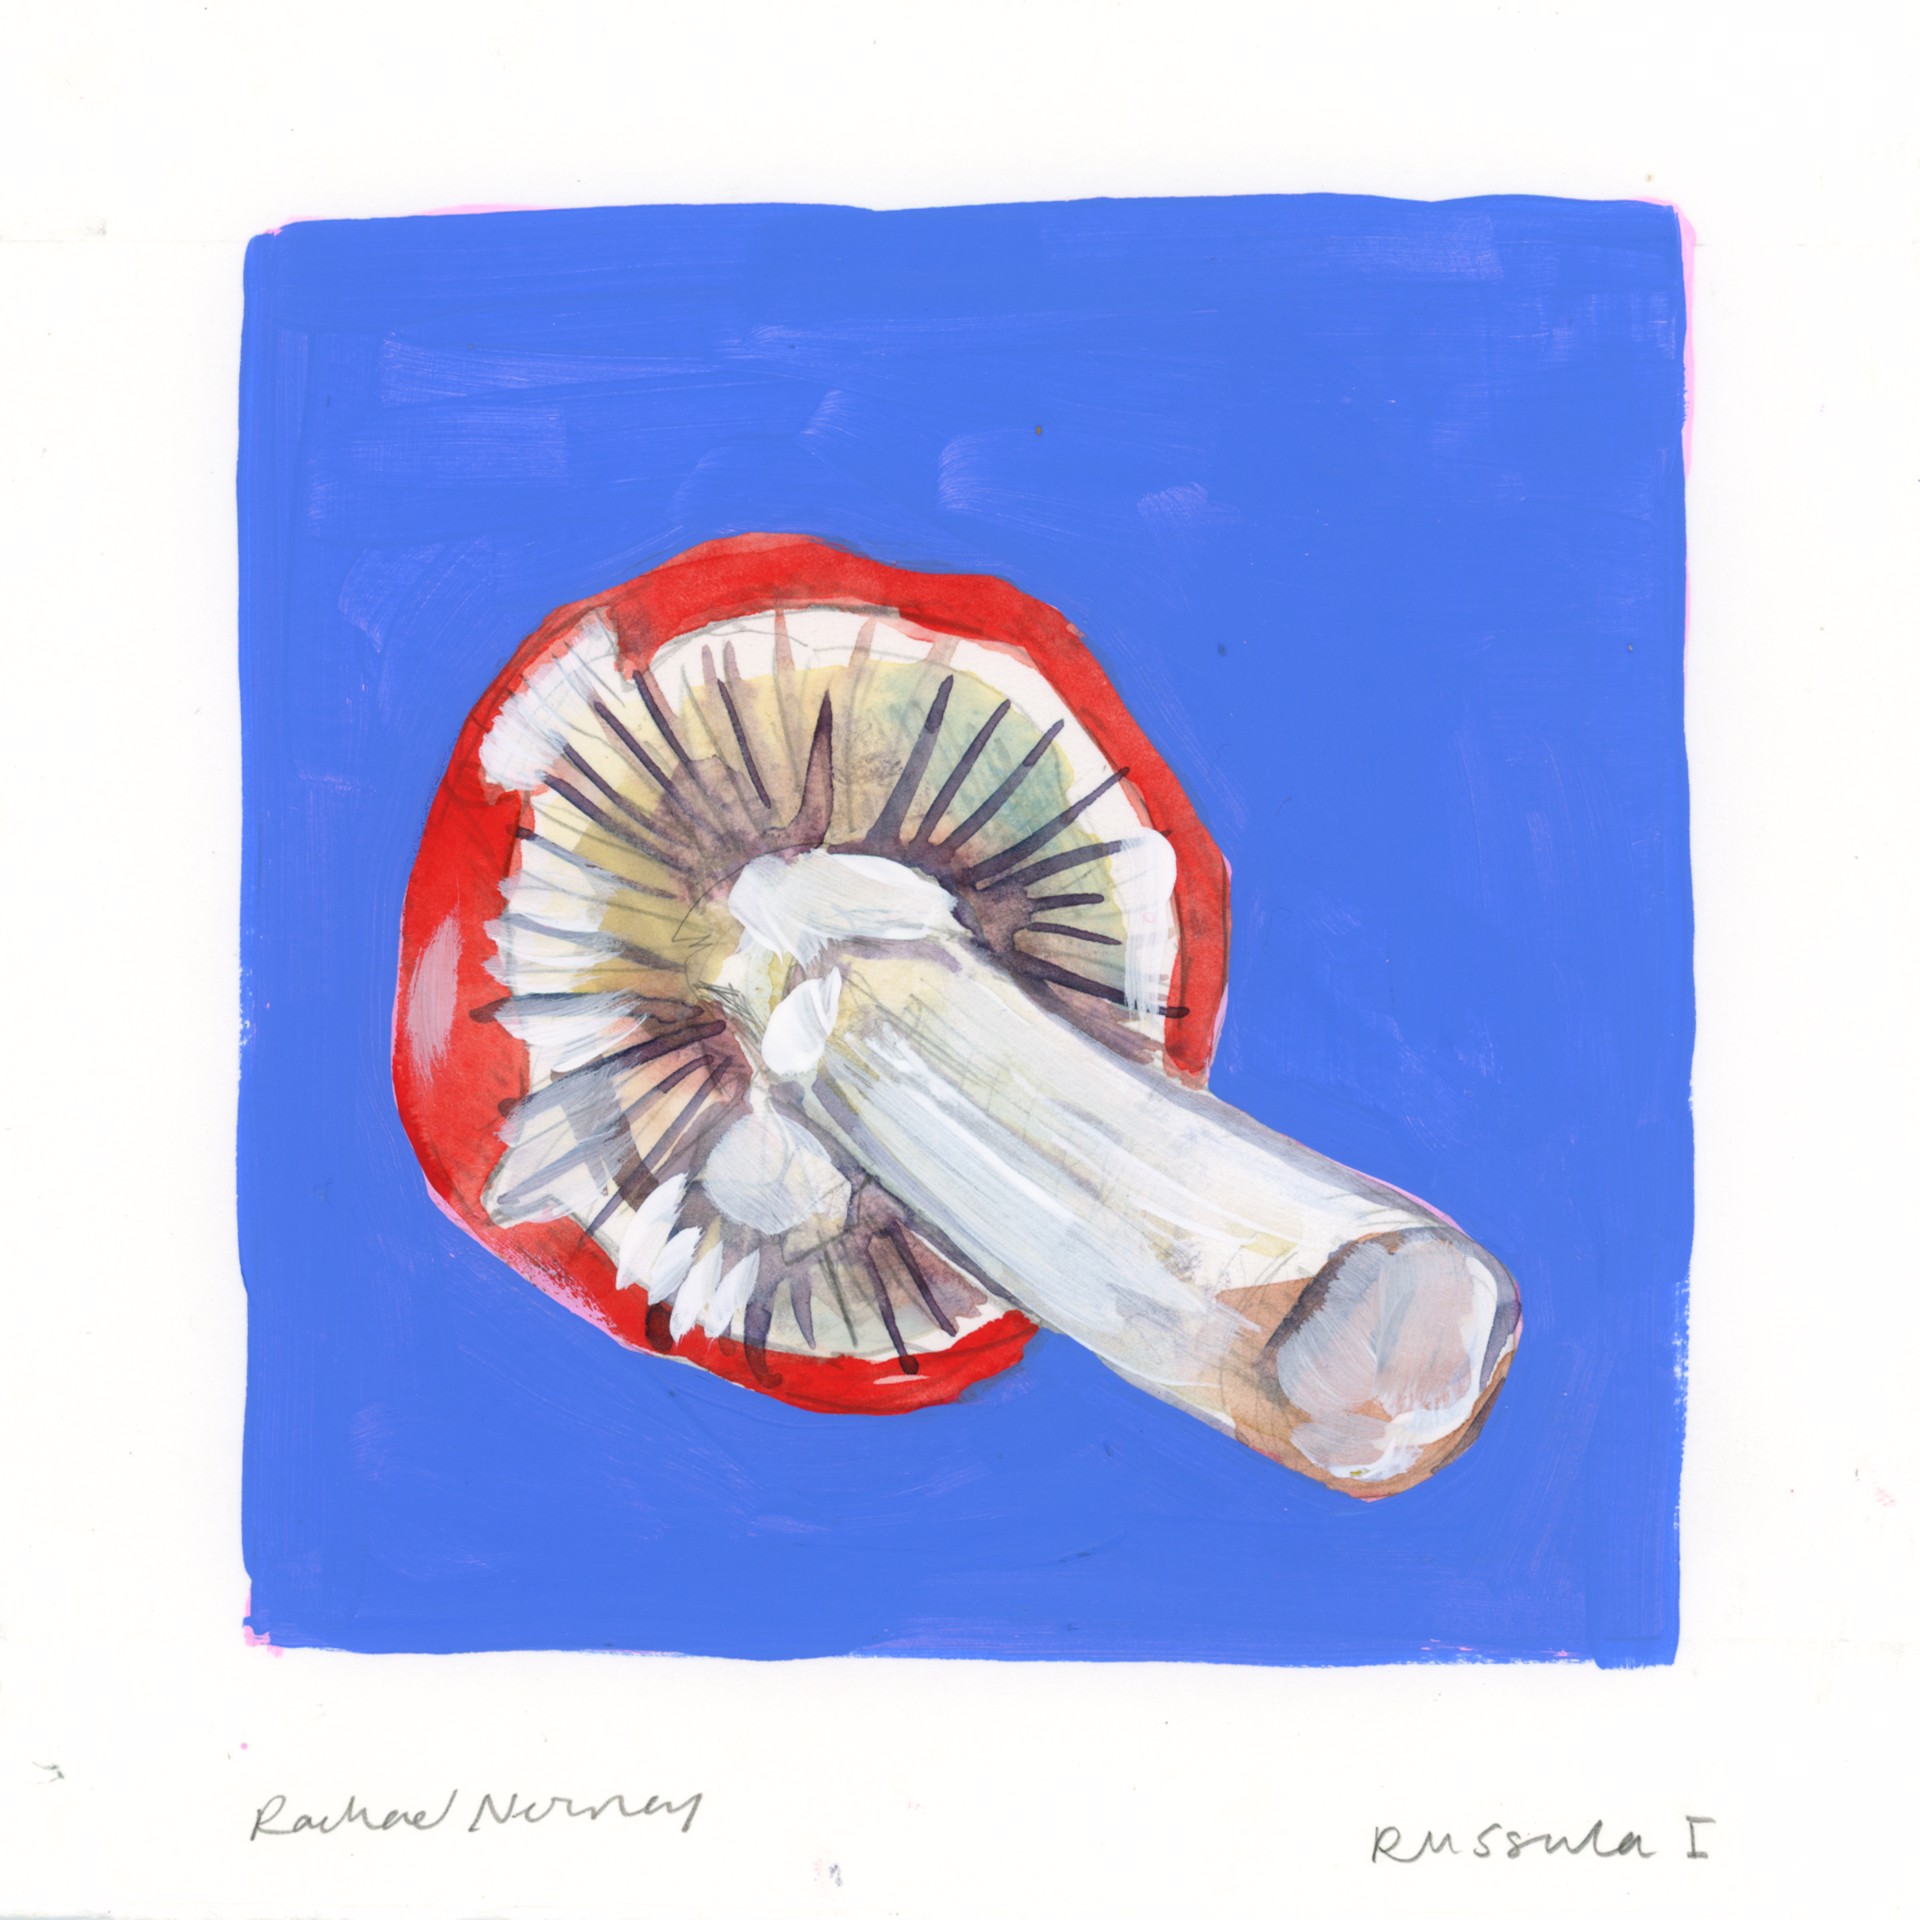 Russula Mushrooms by Rachael Nerney